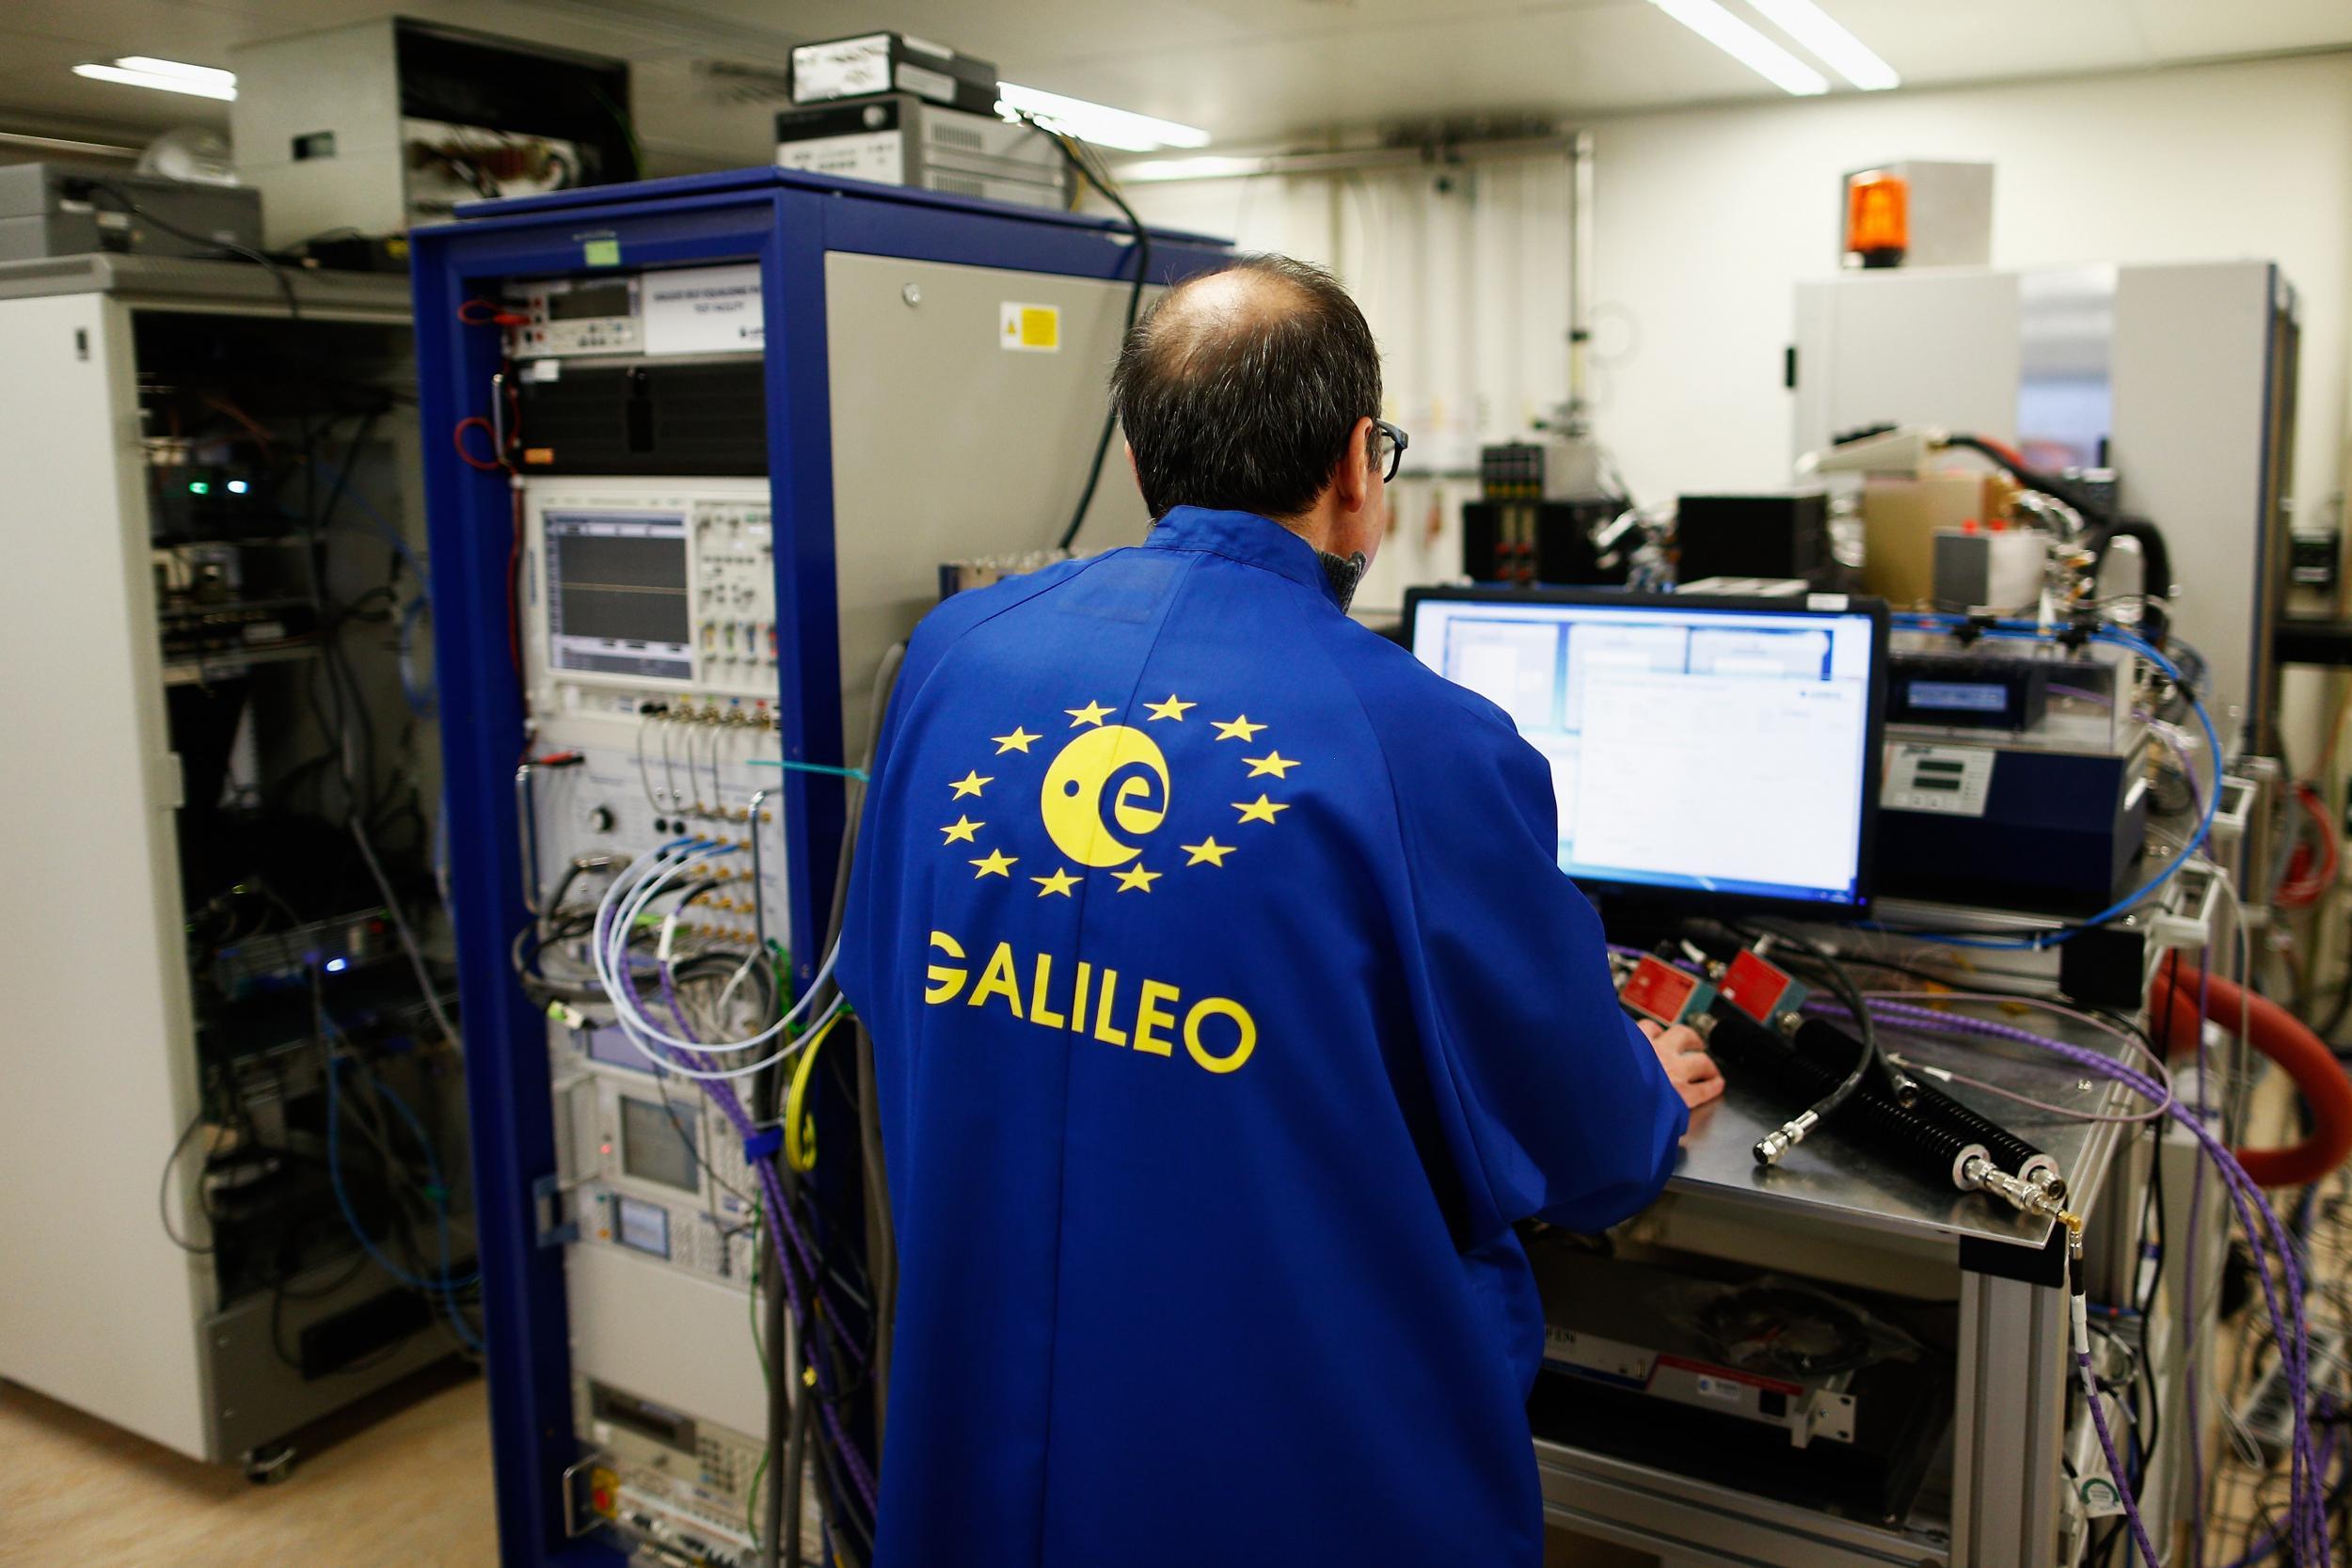 A scientist works on the Galileo satellite system